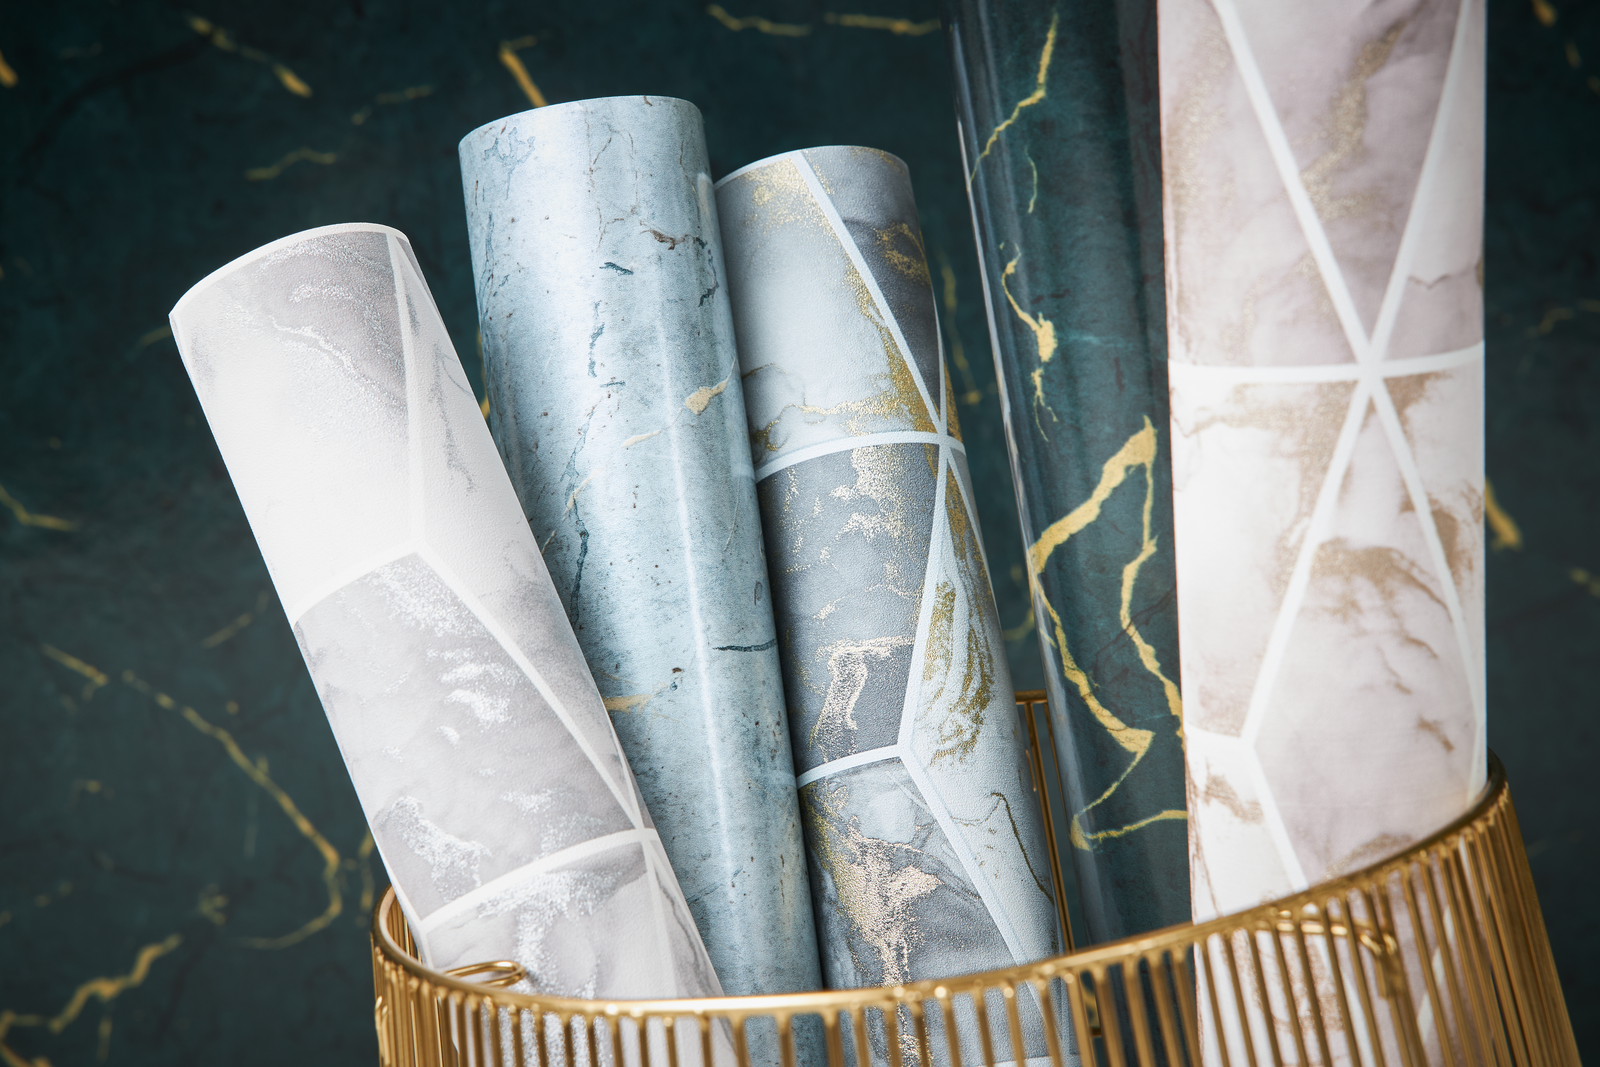             Non-woven wallpaper with marble tiles & gold accent - grey, metallic, white
        